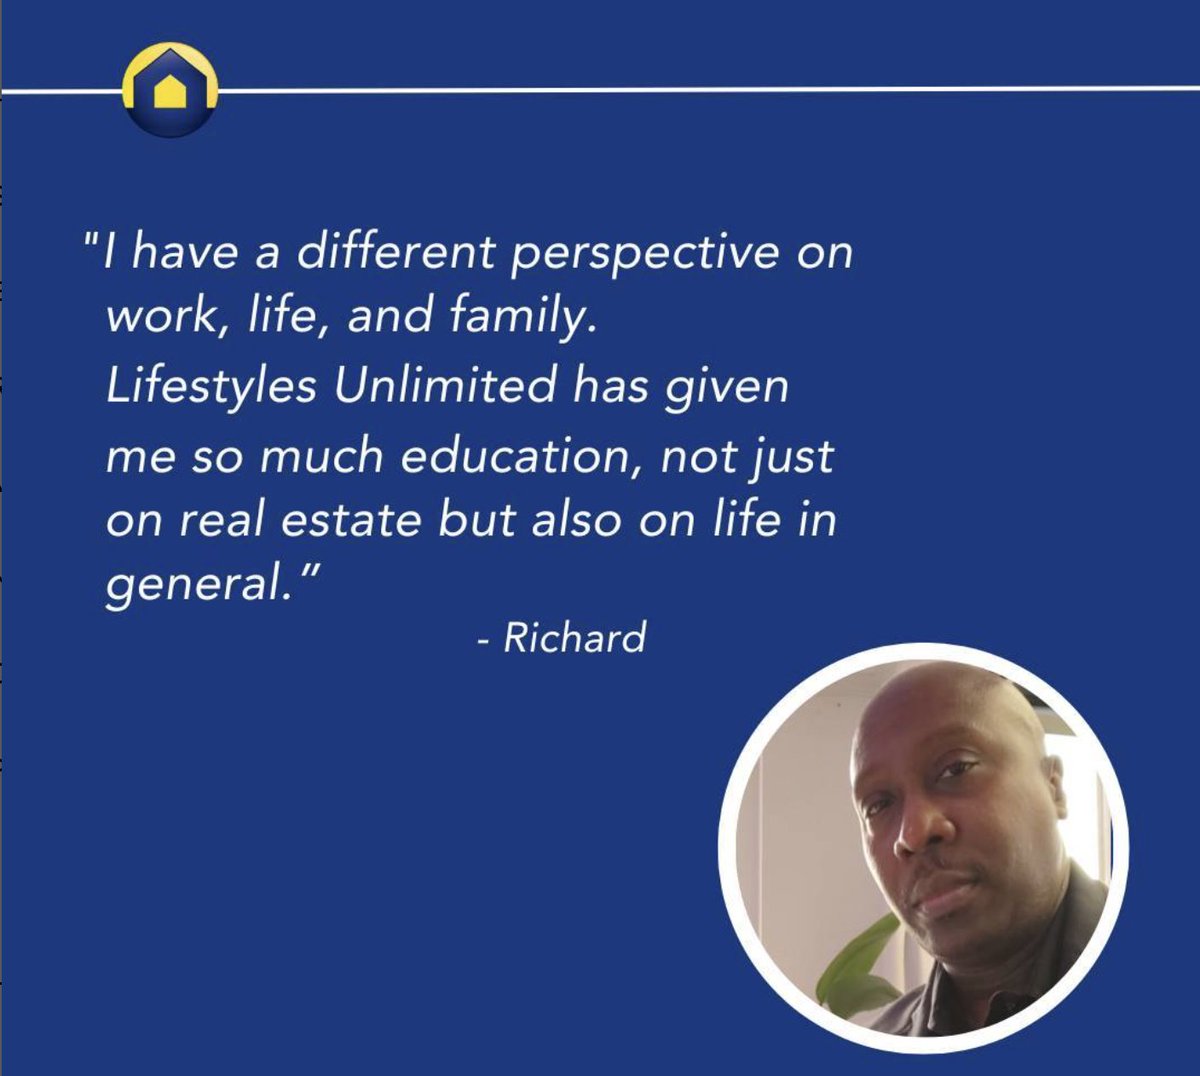 luinc: 'I have a different perspective on work, life, and family...'

#FinancialFreedom #RealEstateInvesting #RentalRealEstateInvesting
#KnowledgeIsPower #Testimonial #LifestylesUnlimited #PassiveIncome #FinancialFreedom